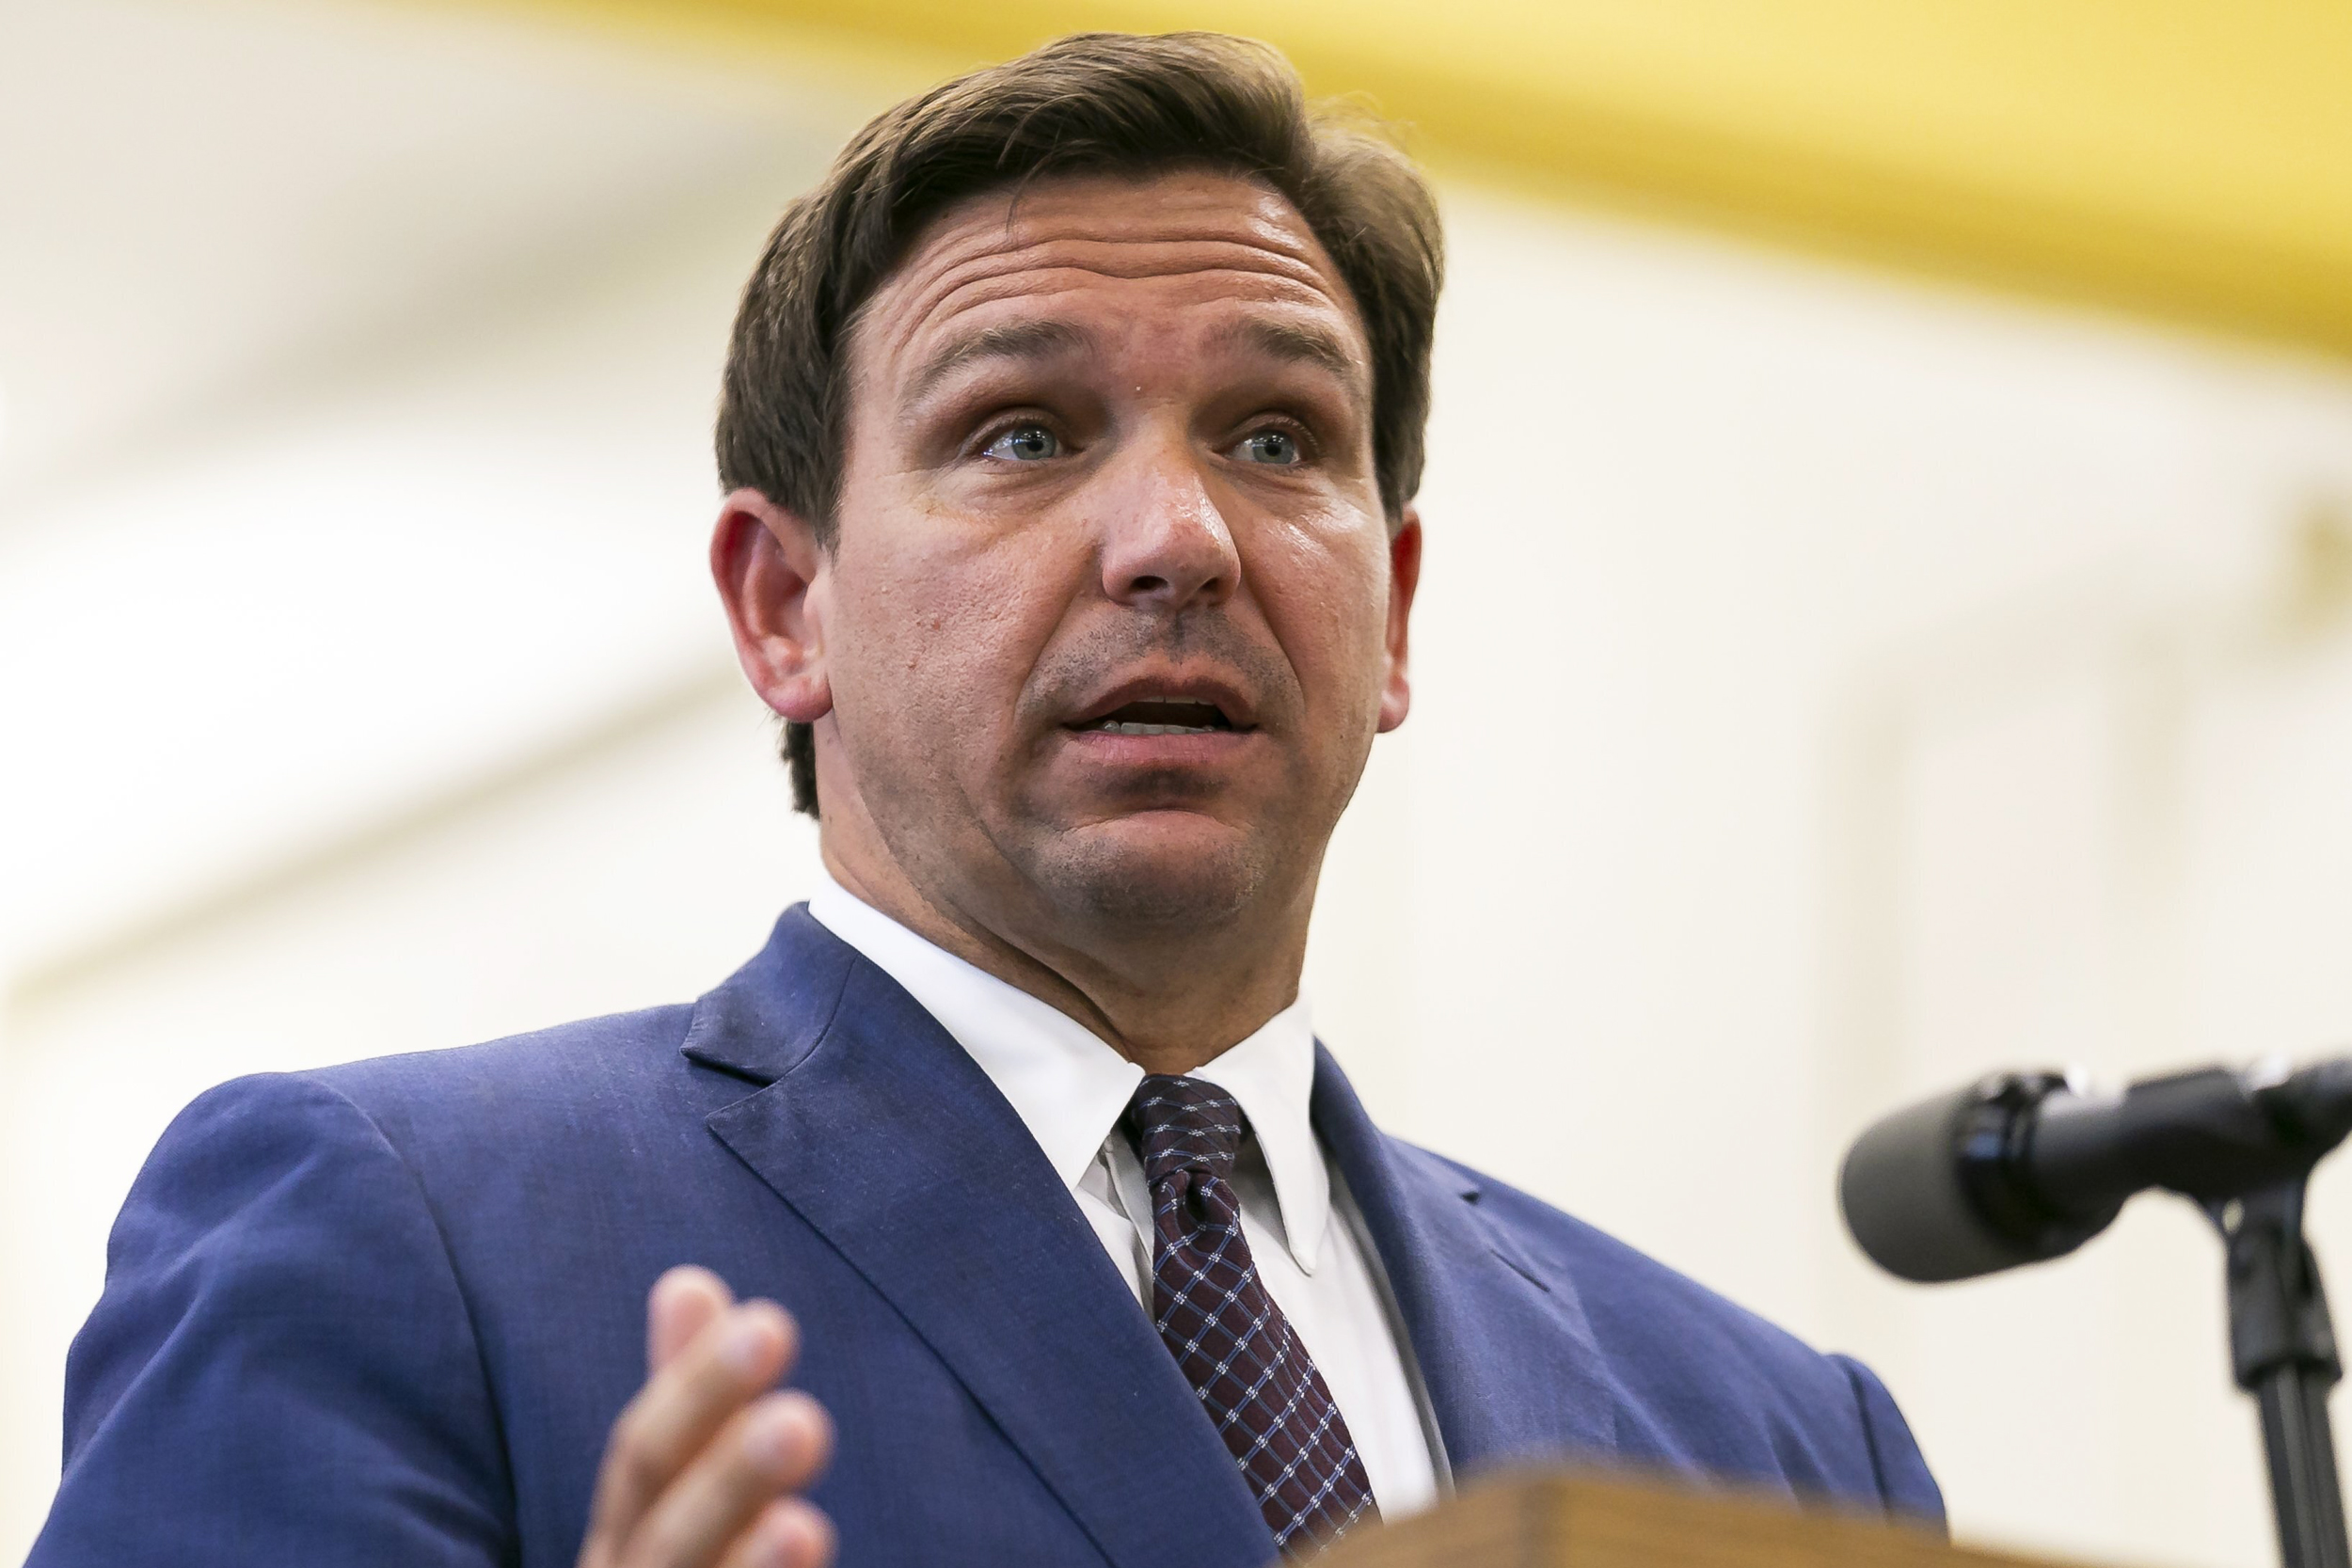 Governor DeSantis Wants State of Florida to Take Over Reedy Creek Improvement Distract Rather Than Local Governments - WDW News Today